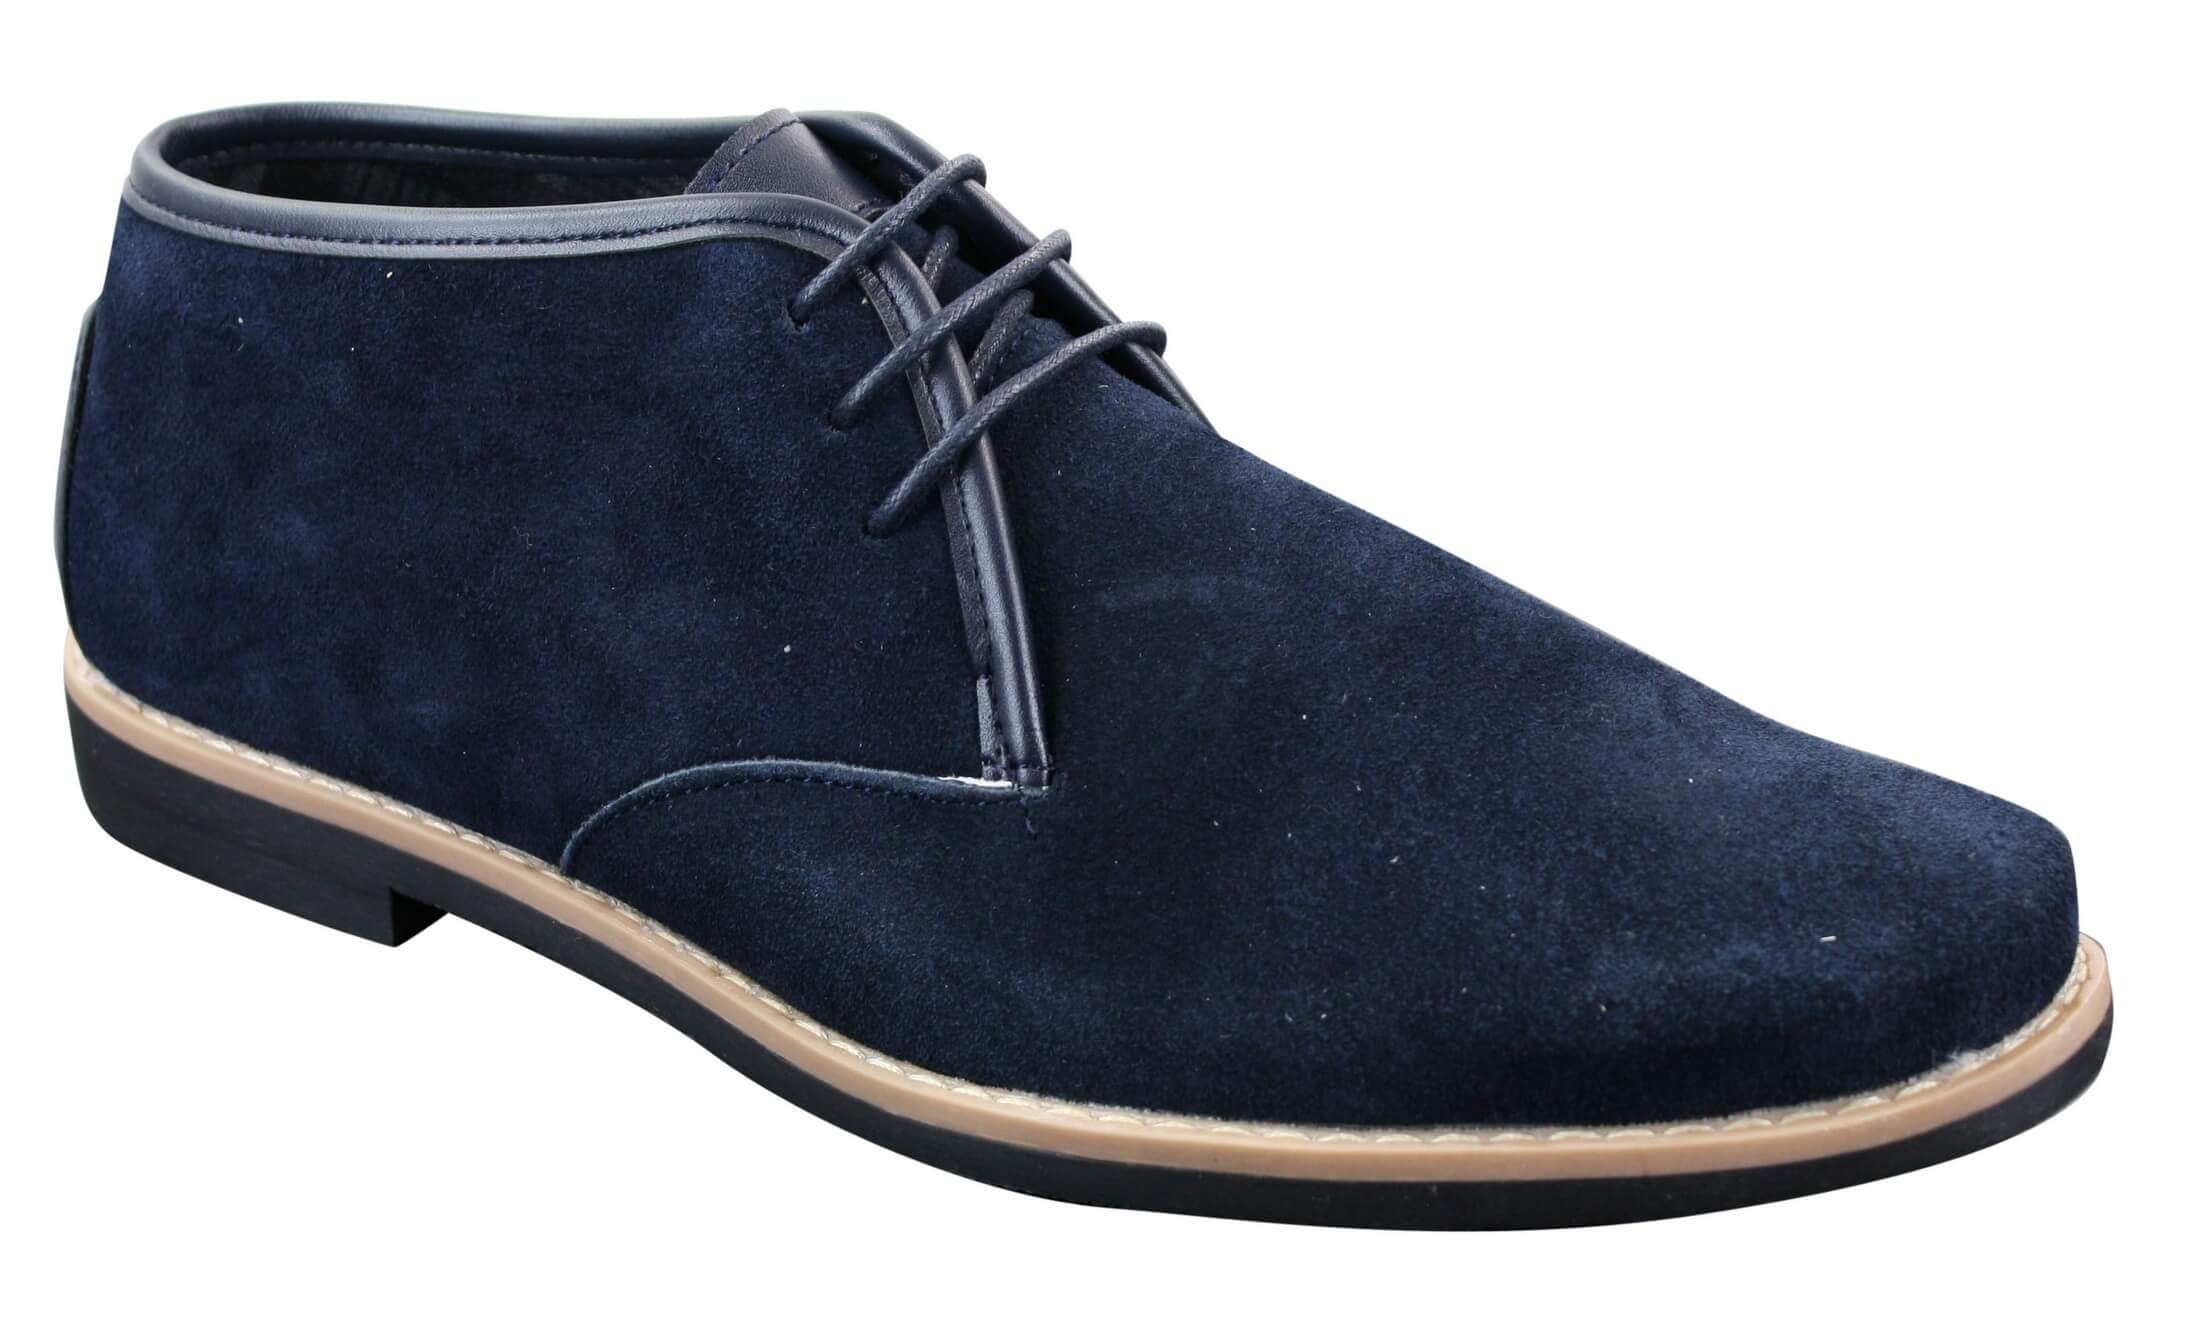 Elong K16 Mens Suede Low Ankle Chelsea Boots Laced Dessert Chukka Shoes Leather Inner Navy Buy